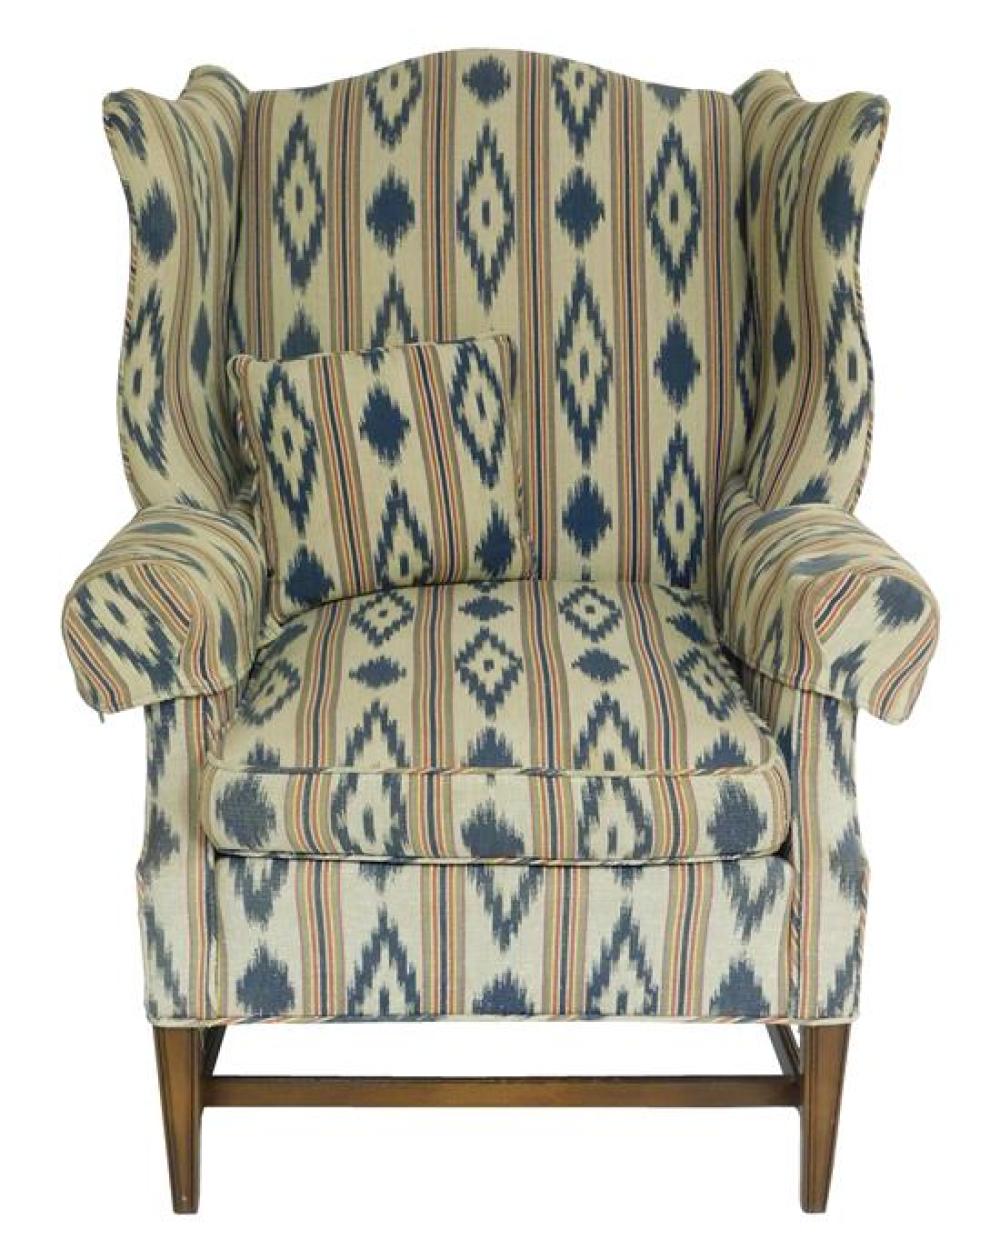 WING CHAIR WITH BLUE AND CREAM 31be16